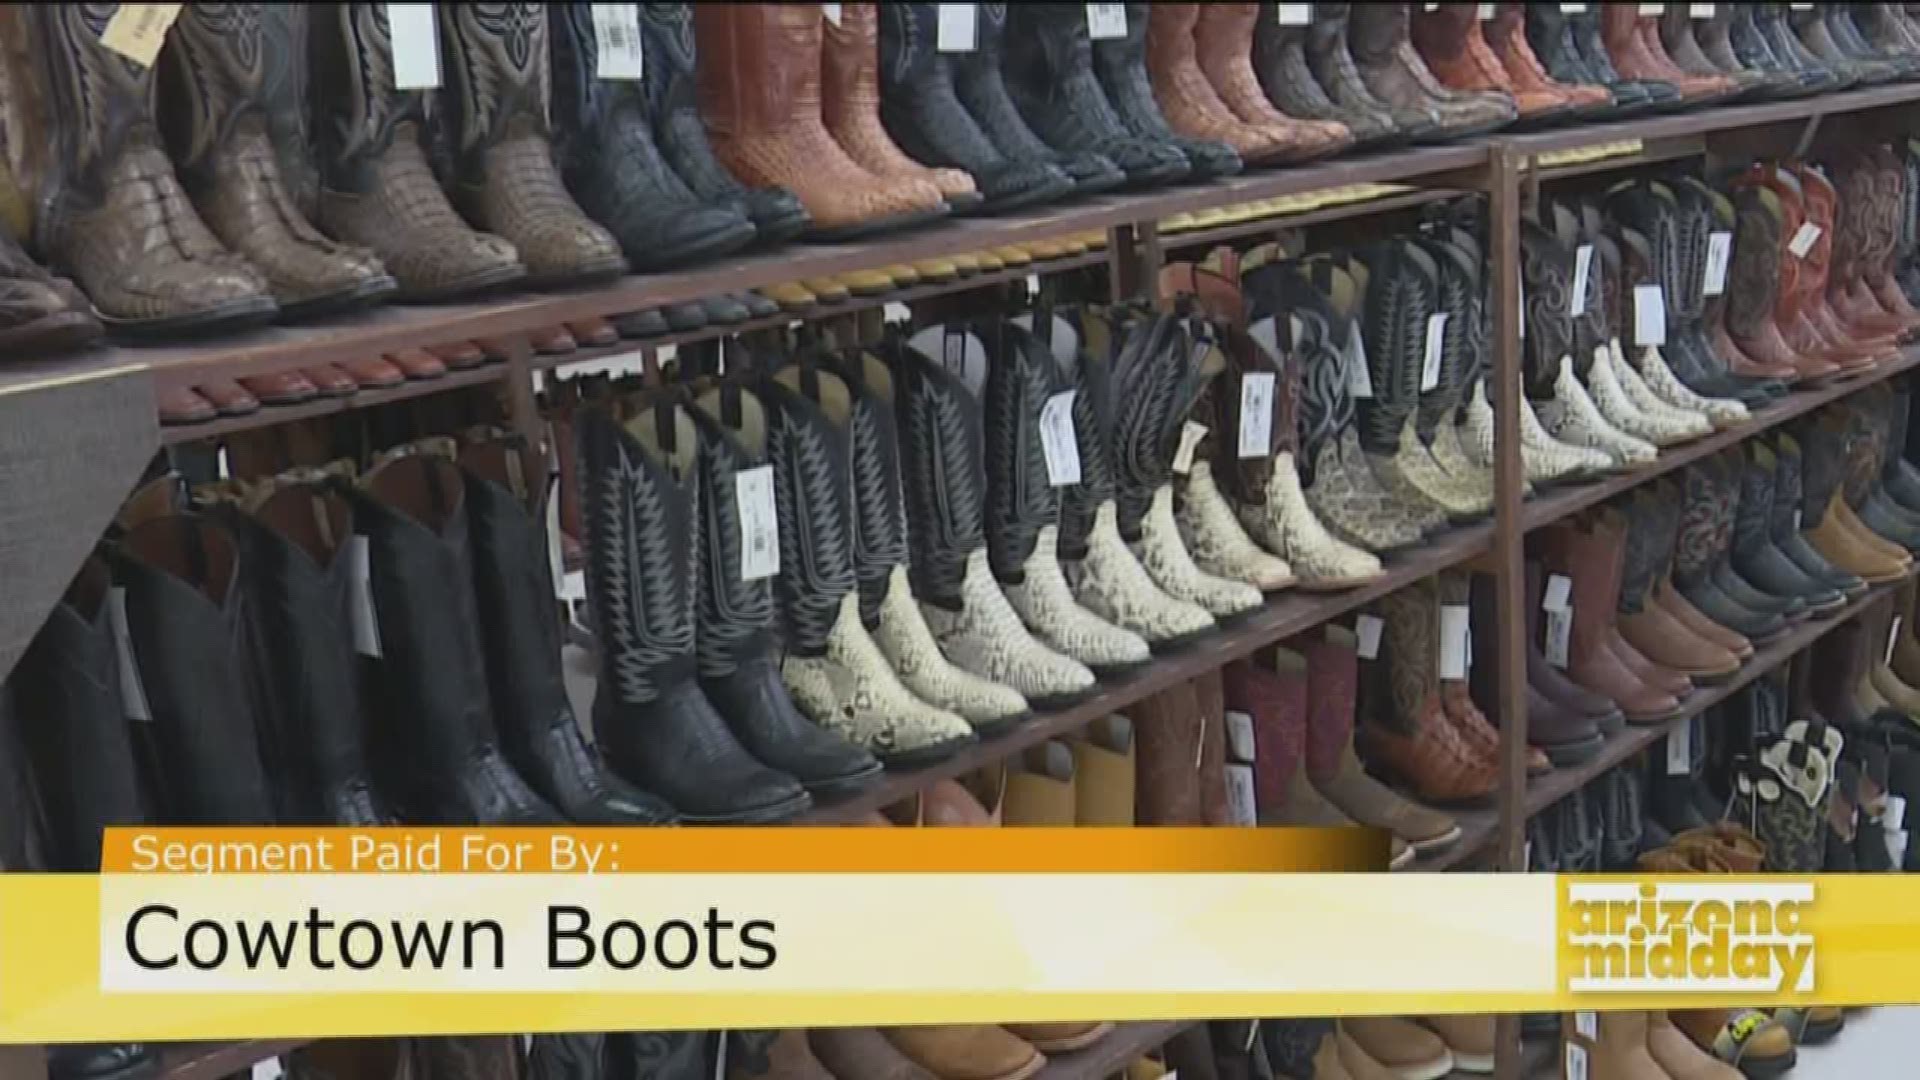 Destry takes us to Cowtown Boots where we see the sleekest styles and cutest cowboy boots!